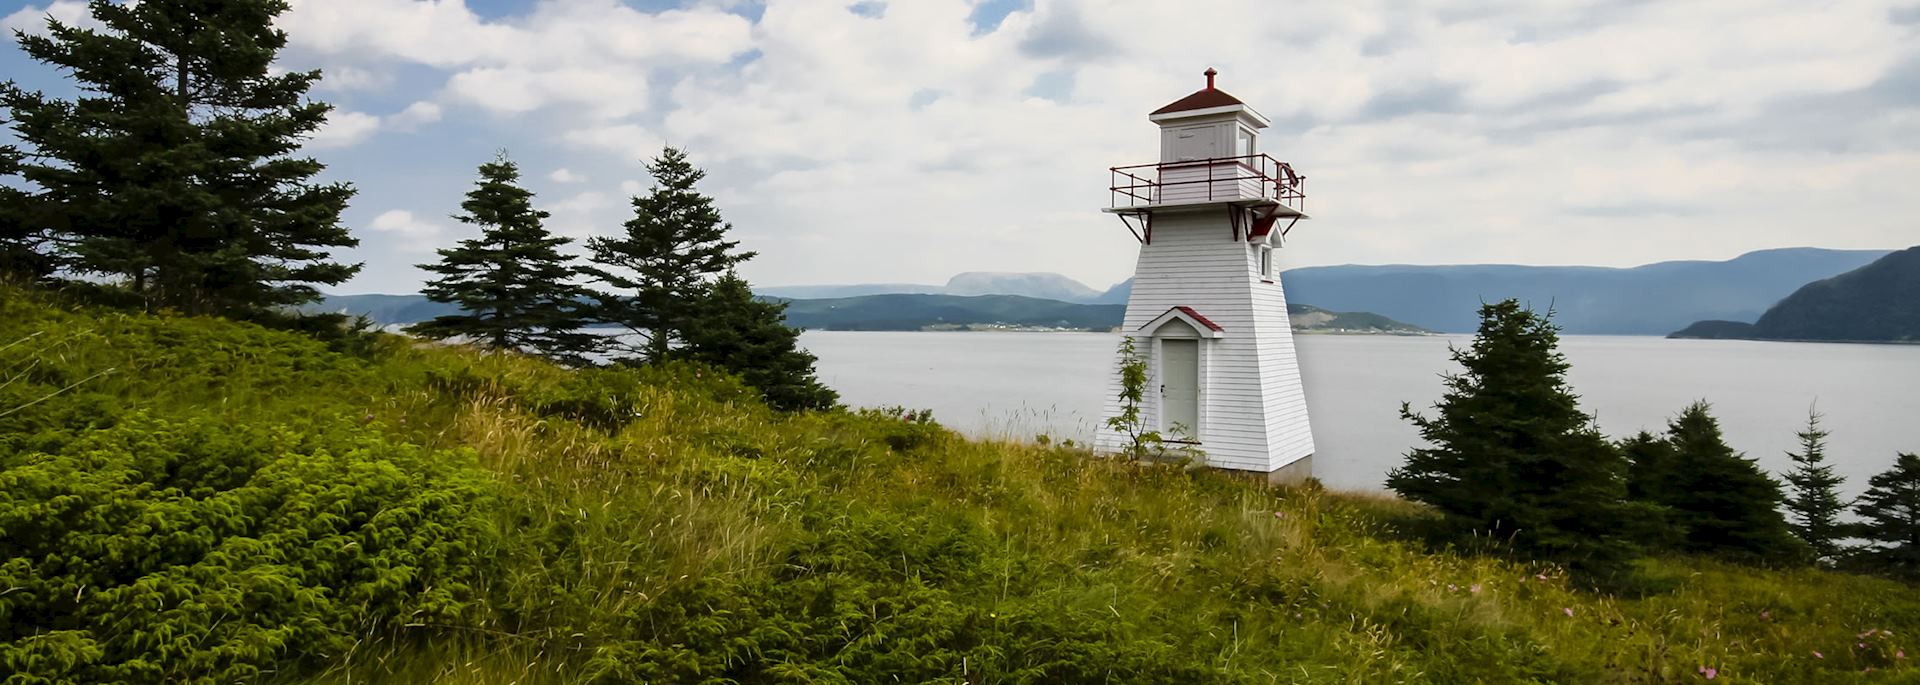 Woody Point Lighthouse, Gros Morne National Park